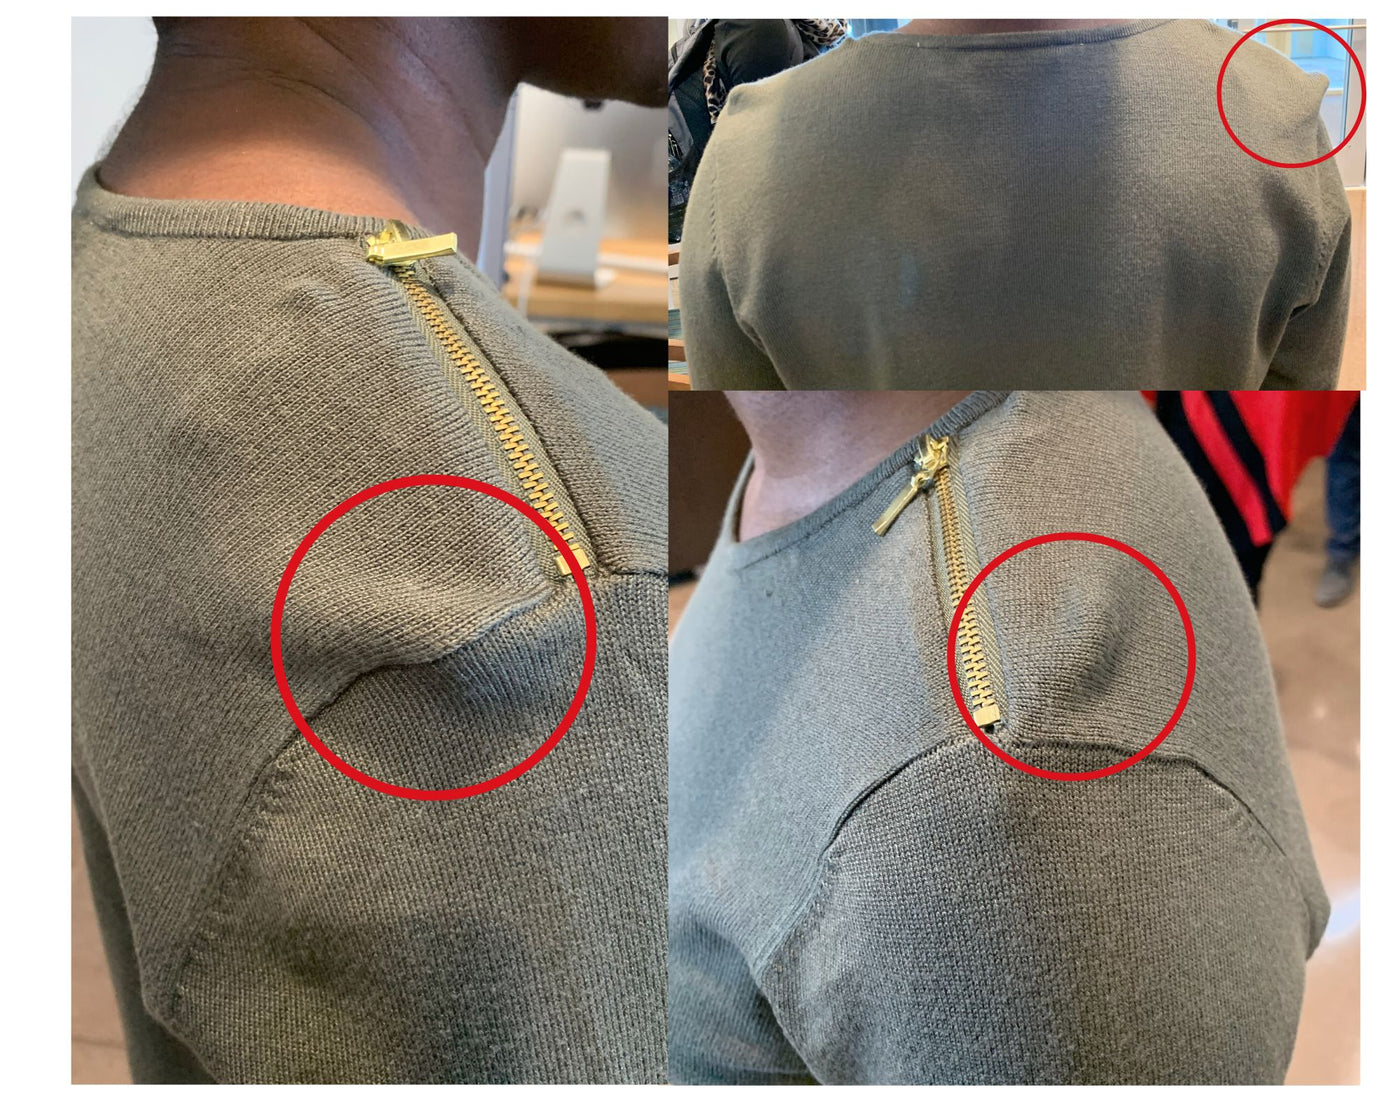 Three images from different angles demonstrating a person that has on a garment with fabric shoulder bumps on each side of their garment